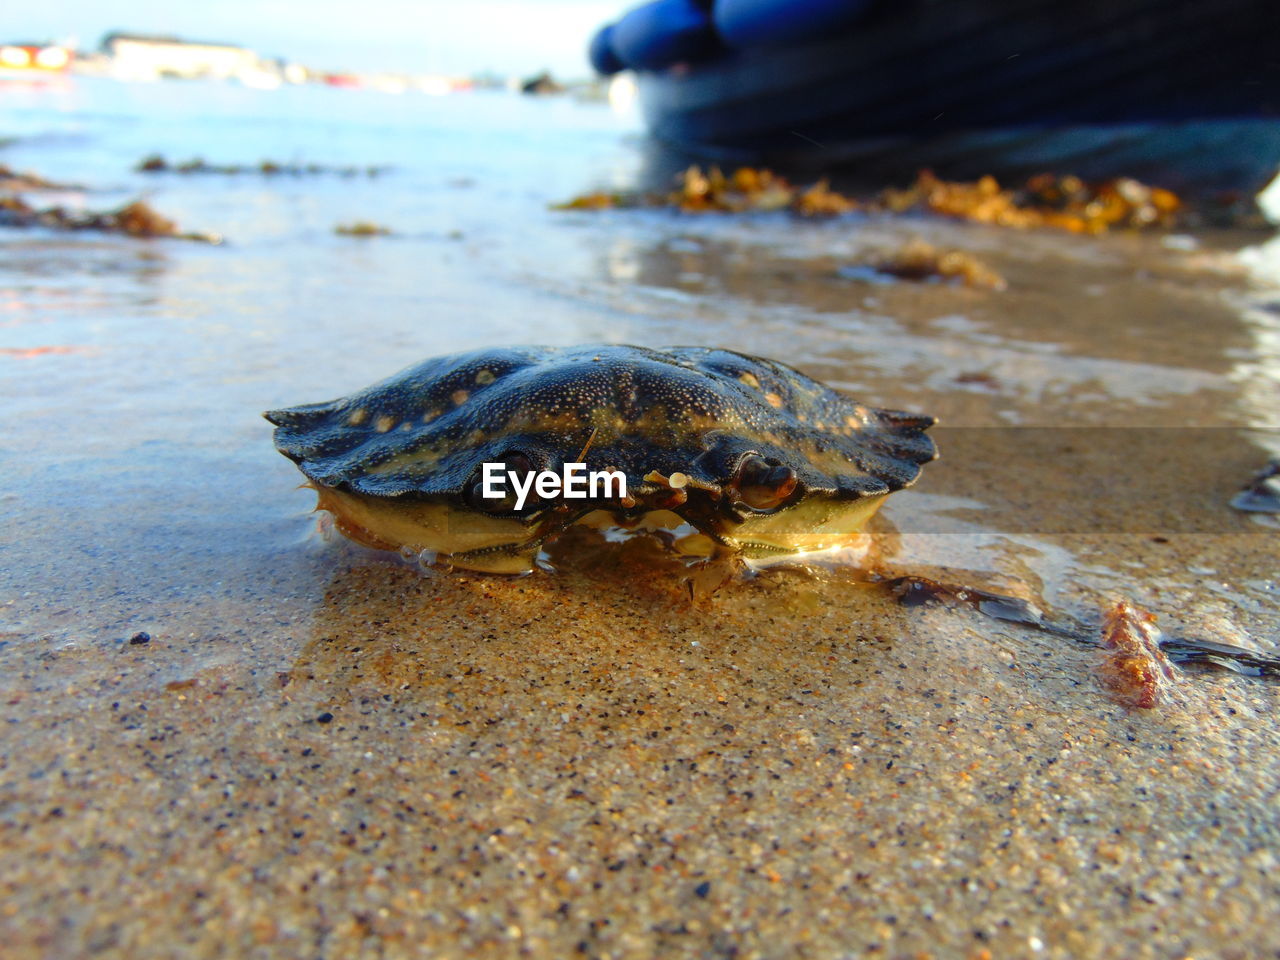 CLOSE-UP OF TURTLE ON BEACH